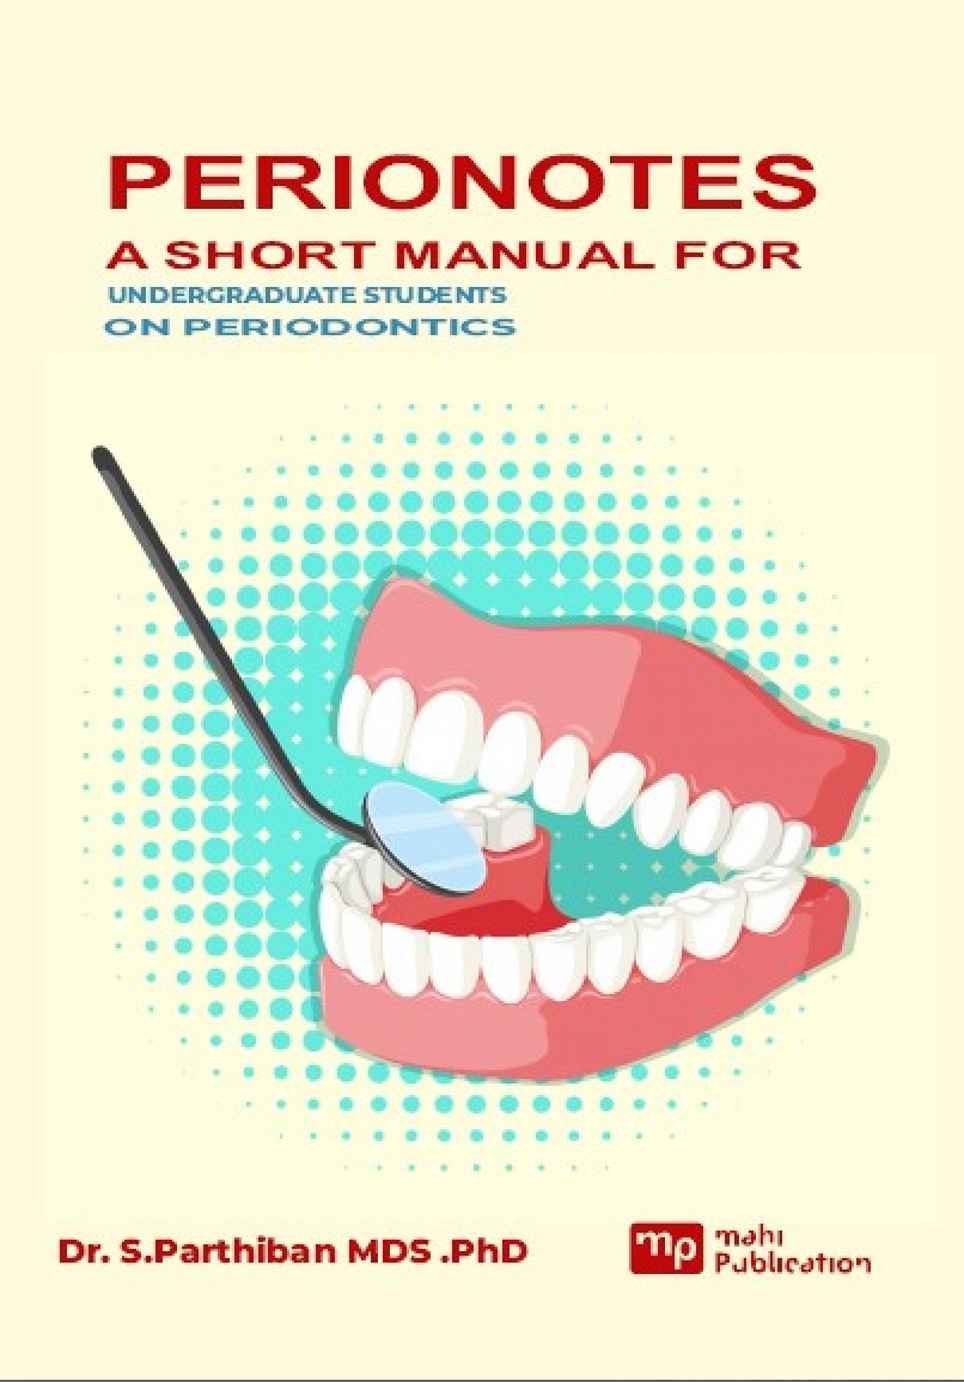 Perionotes a Short Manual For Undergraduate Students on Periodontics